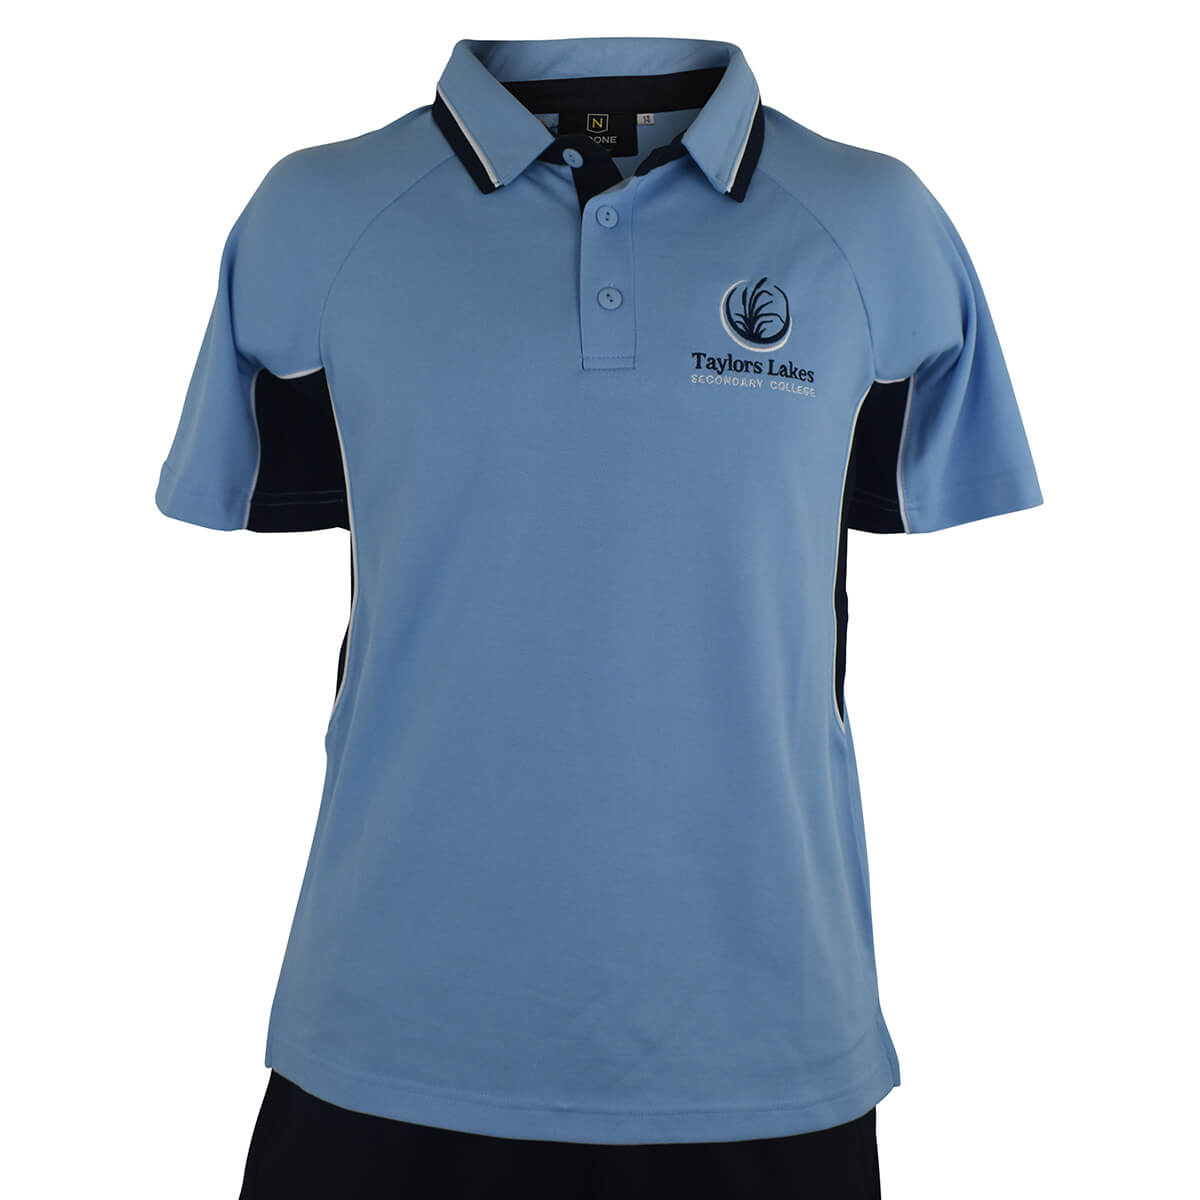 Taylors Lakes S/S Sports Polo | Taylors Lakes Secondary College | Noone